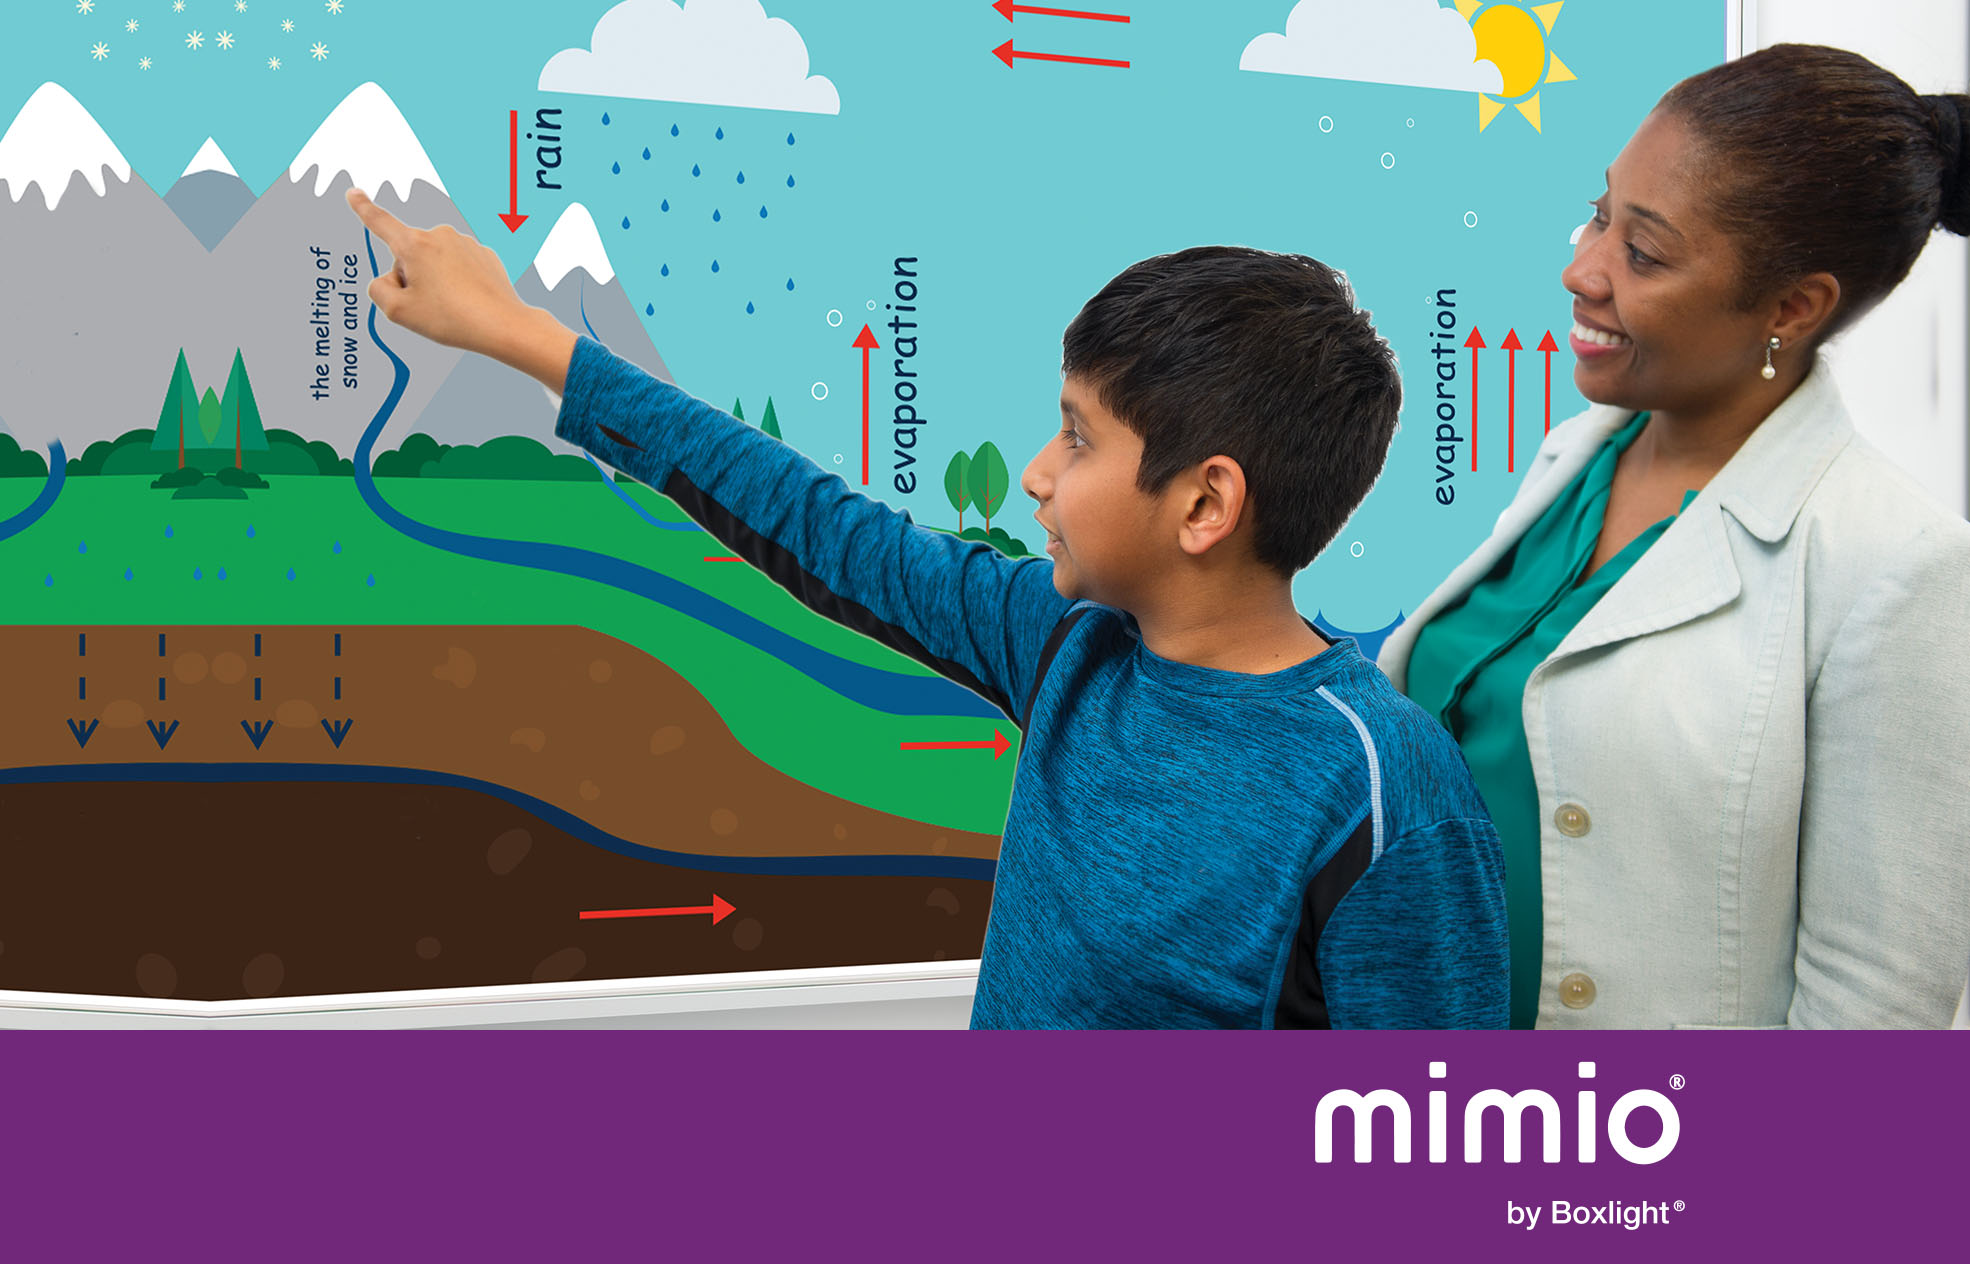 teacher helping student use a mimio frame with purple banner saying 'mimio by boxlight' at the bottom